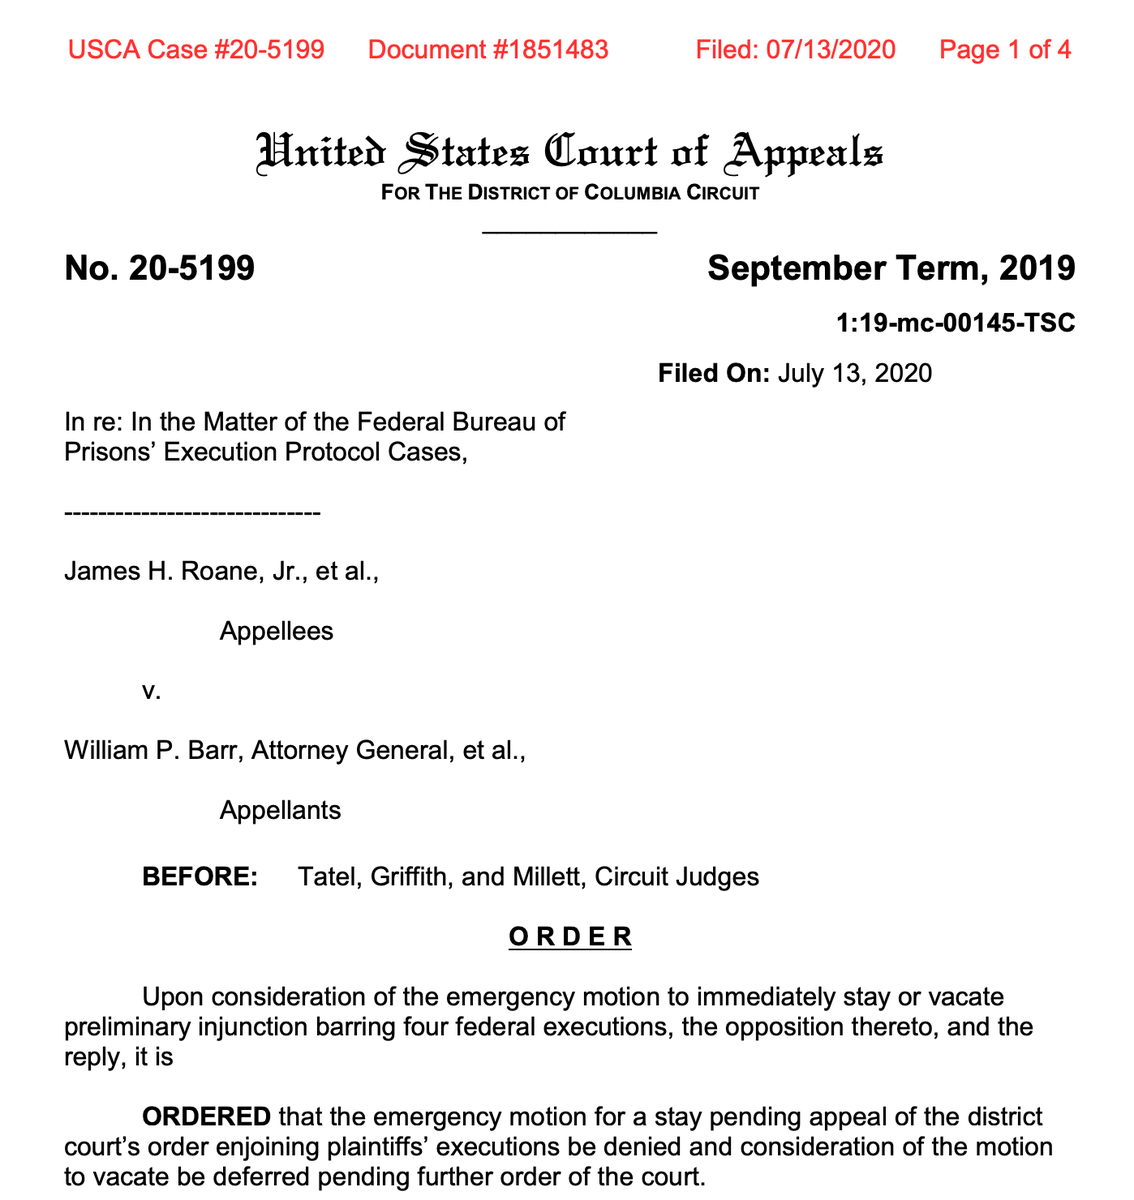 BREAKING: DC Circuit DENIES DOJ request to proceed with today's scheduled execution by denying a stay of the district court's injunction. The DC Circuit also orders expedited merits briefing in federal execution challenge.